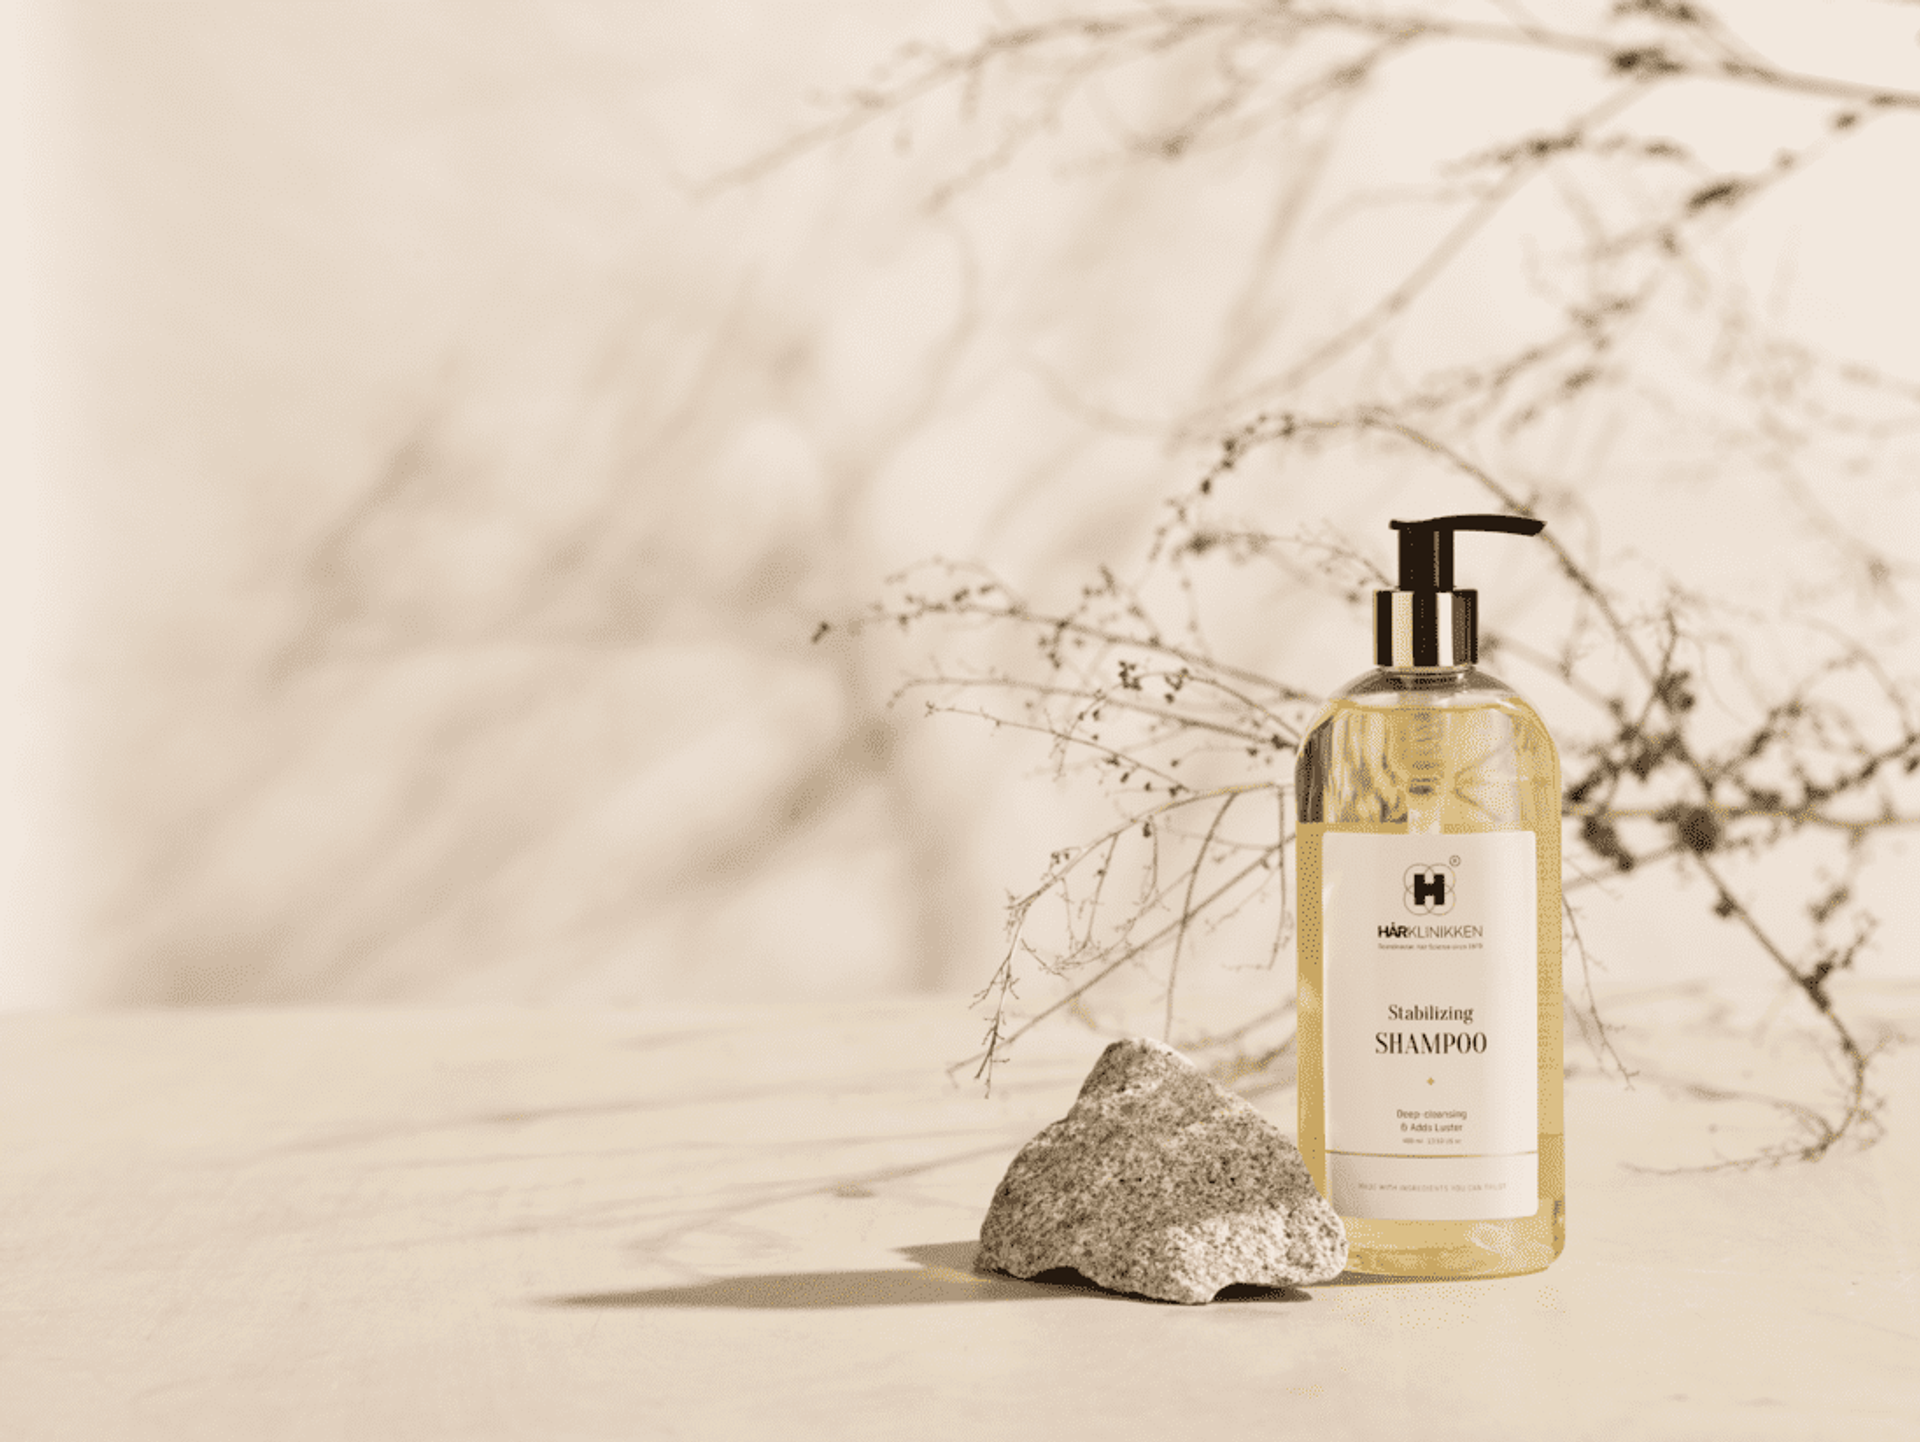 Picture of Harklinikken Stabilizing Shampoo next to stone and branches